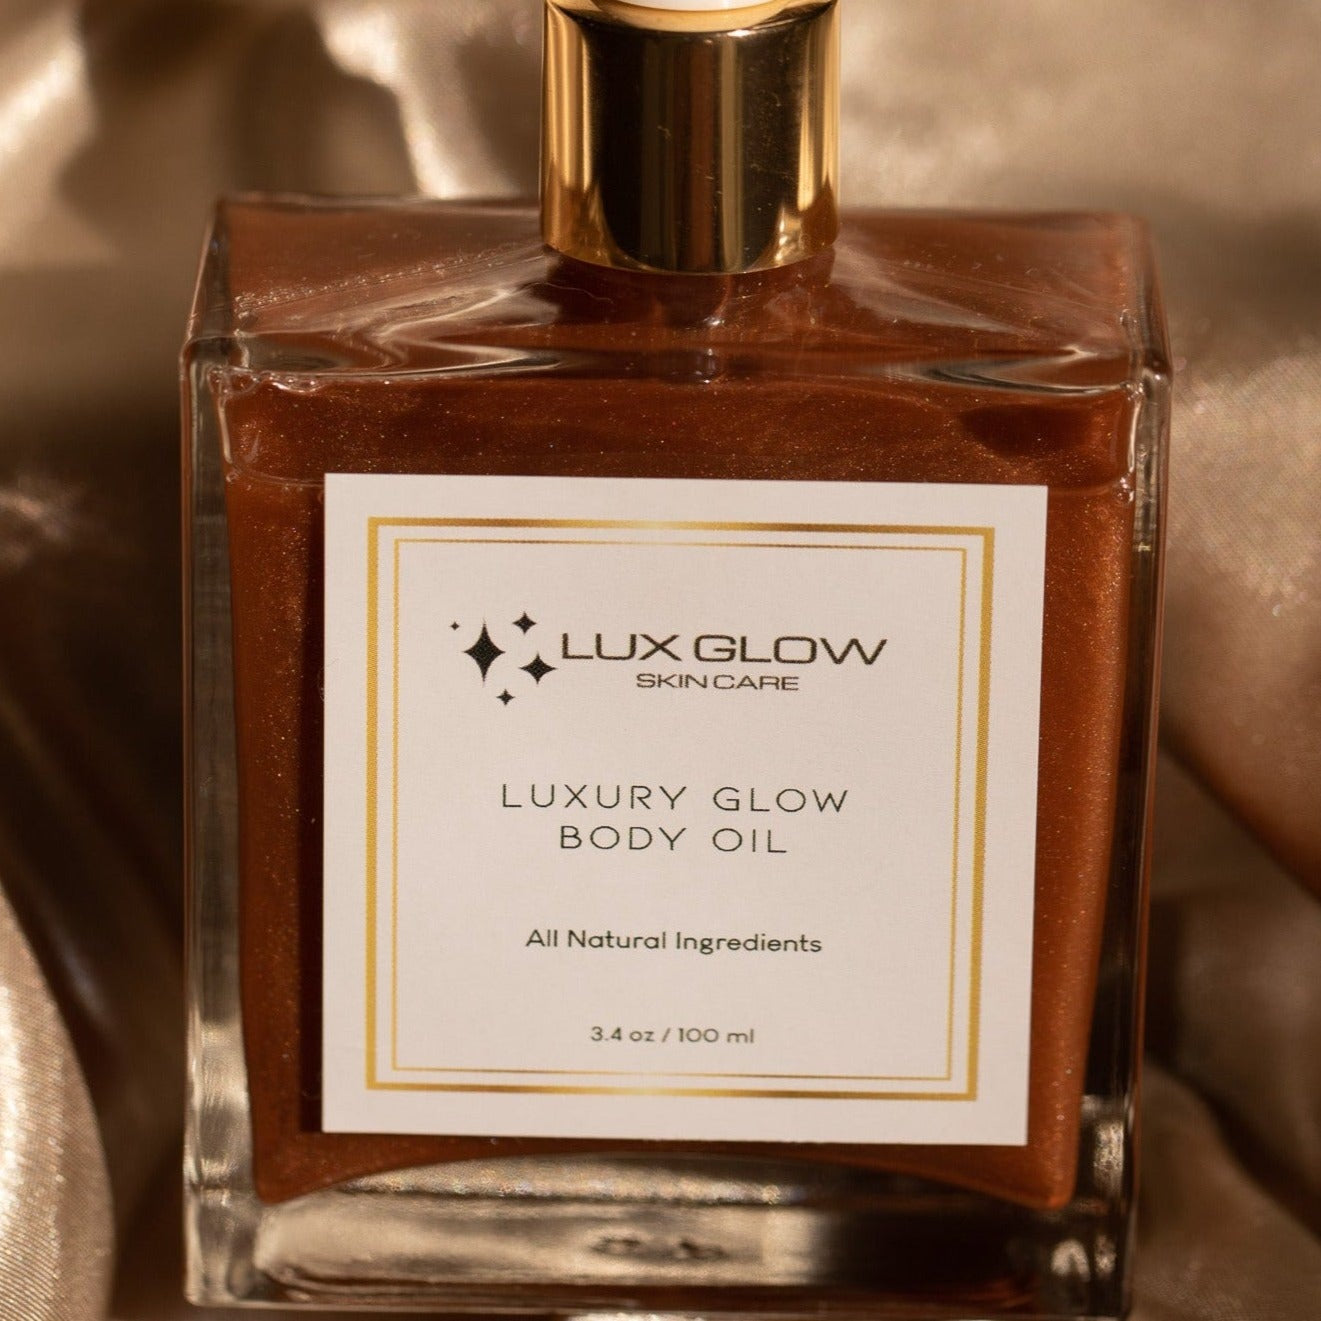 Luxury Glow Body Oil Bronzer Made with all natural ingredients, the silky oil creates an irresistible bronze shimmer, illuminating the skin for the ultimate fresh-out-the-shower product. Tempting, sexy, vibrant and nourishing to keep your skin glittering with a healthy glow. Contains Cocoa Butter, Shae Butter, Virgin Almond Oil, Warm Vanilla Oil, Soybean Oil, Sesame Oil, Safflower Oil, Mineral Oil, Vitamins A, D, & E. Handcrafted in the USA.